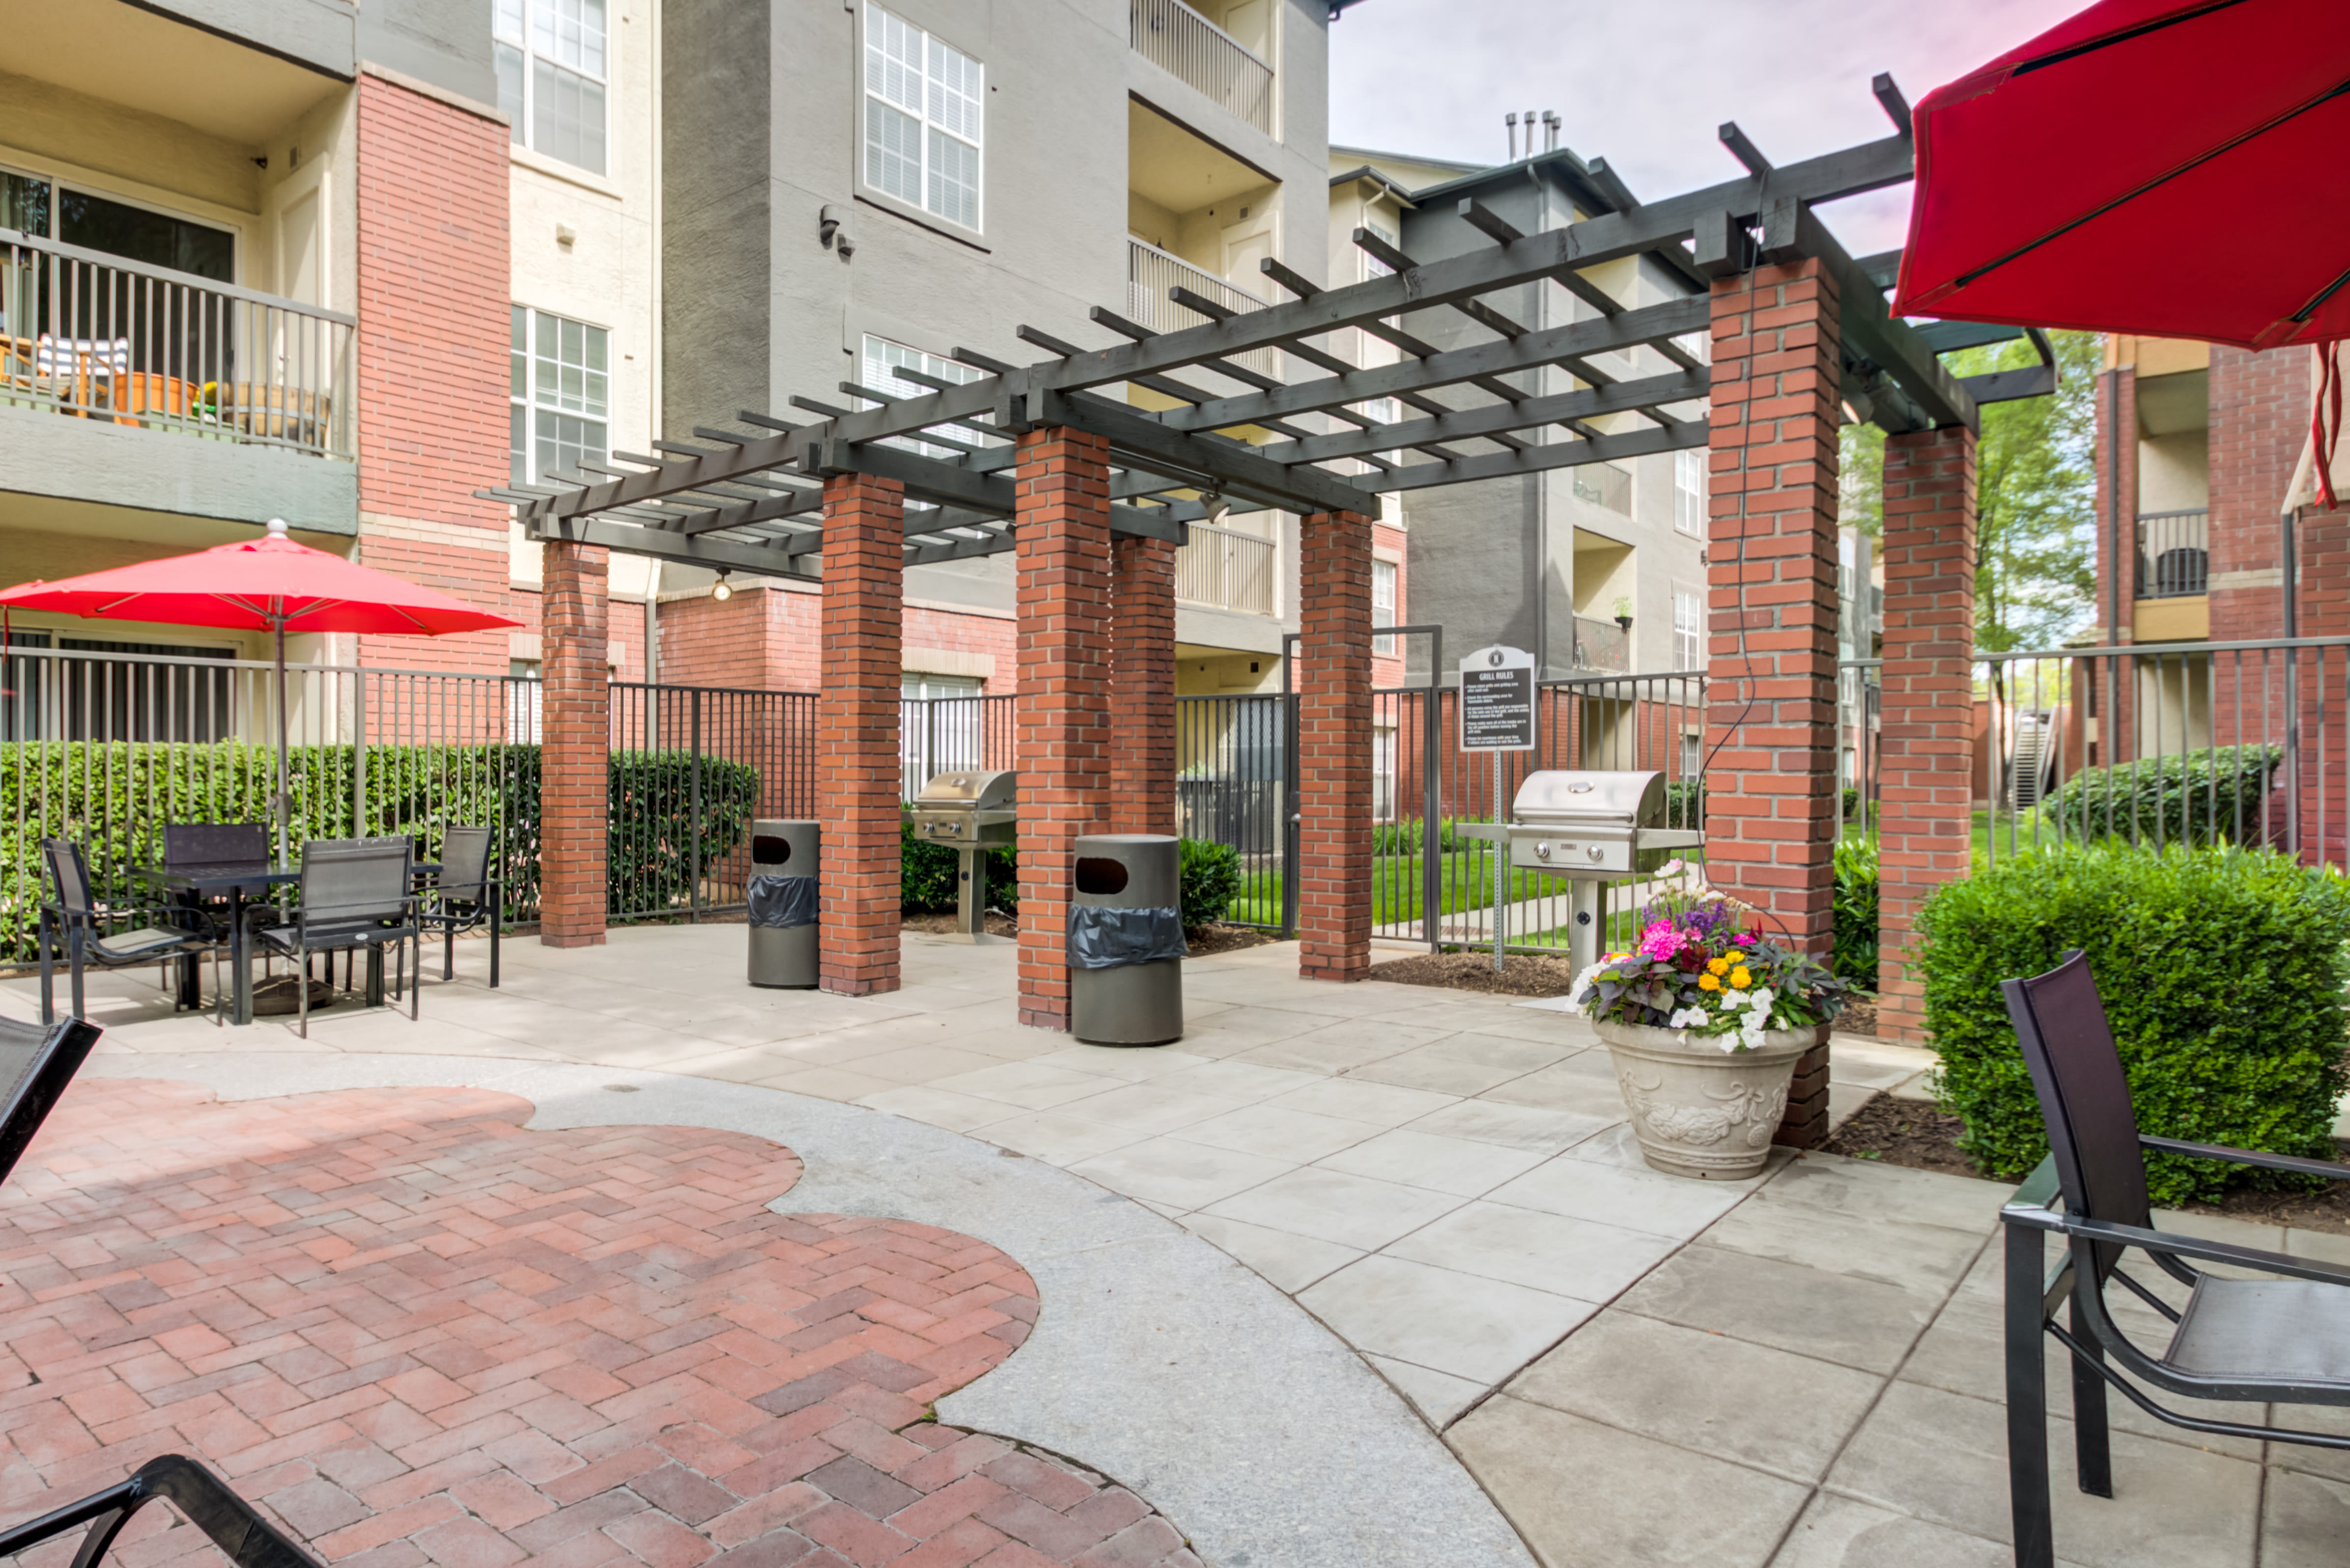  Outdoor seating with shade pergola at Irving Schoolhouse Apartments in Salt Lake City, Utah